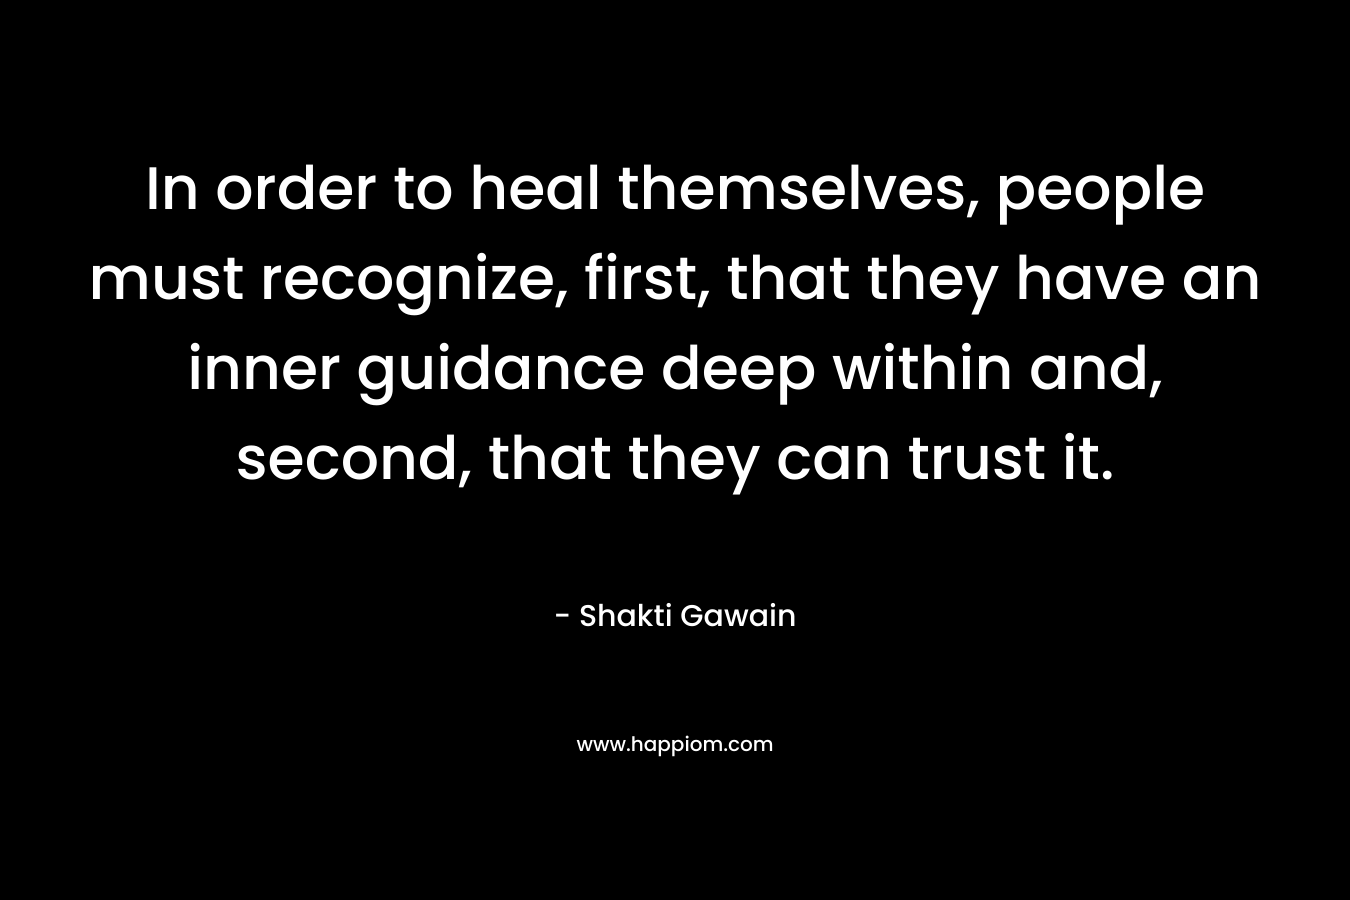 In order to heal themselves, people must recognize, first, that they have an inner guidance deep within and, second, that they can trust it.